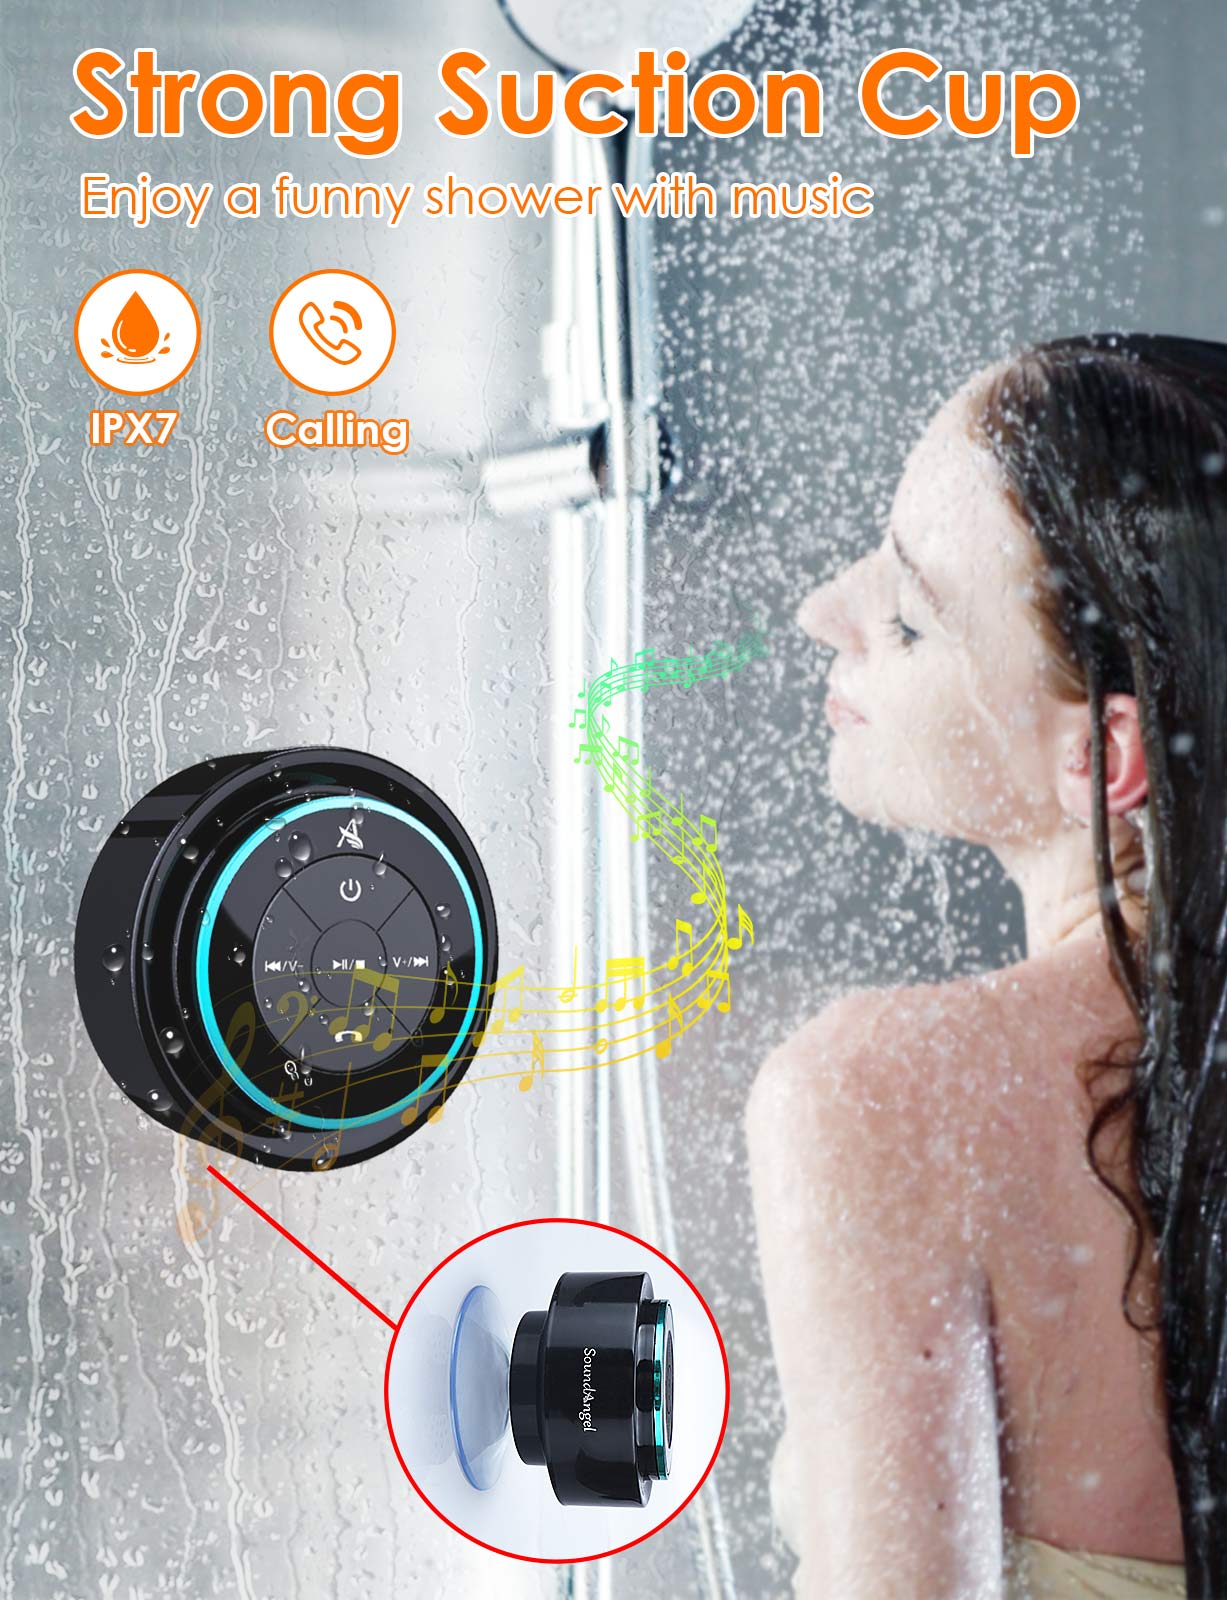 XLeader SoundAngel Mate - Premium 5W Bluetooth Shower Speaker IPX7 Waterproof Speaker with Suction Cup, 3D Crystal Sound & Bass, Perfect Mini Wireless Speakers for iPhone Pool Bathroom Gift-Blue - image 2 of 7